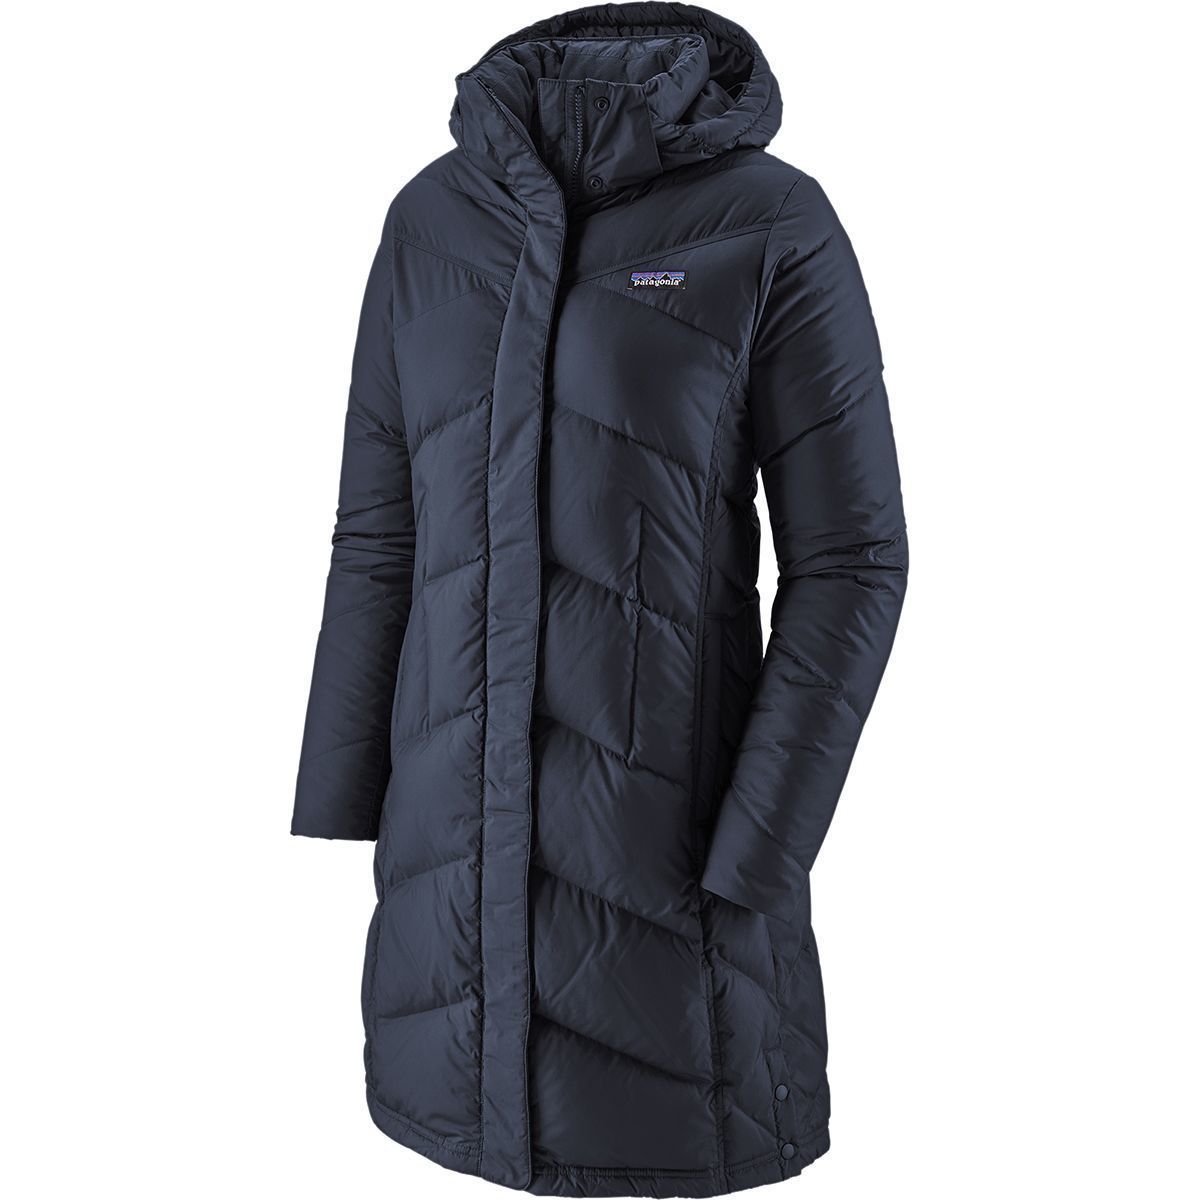 Patagonia Down With It Parka - Women's | Backcountry